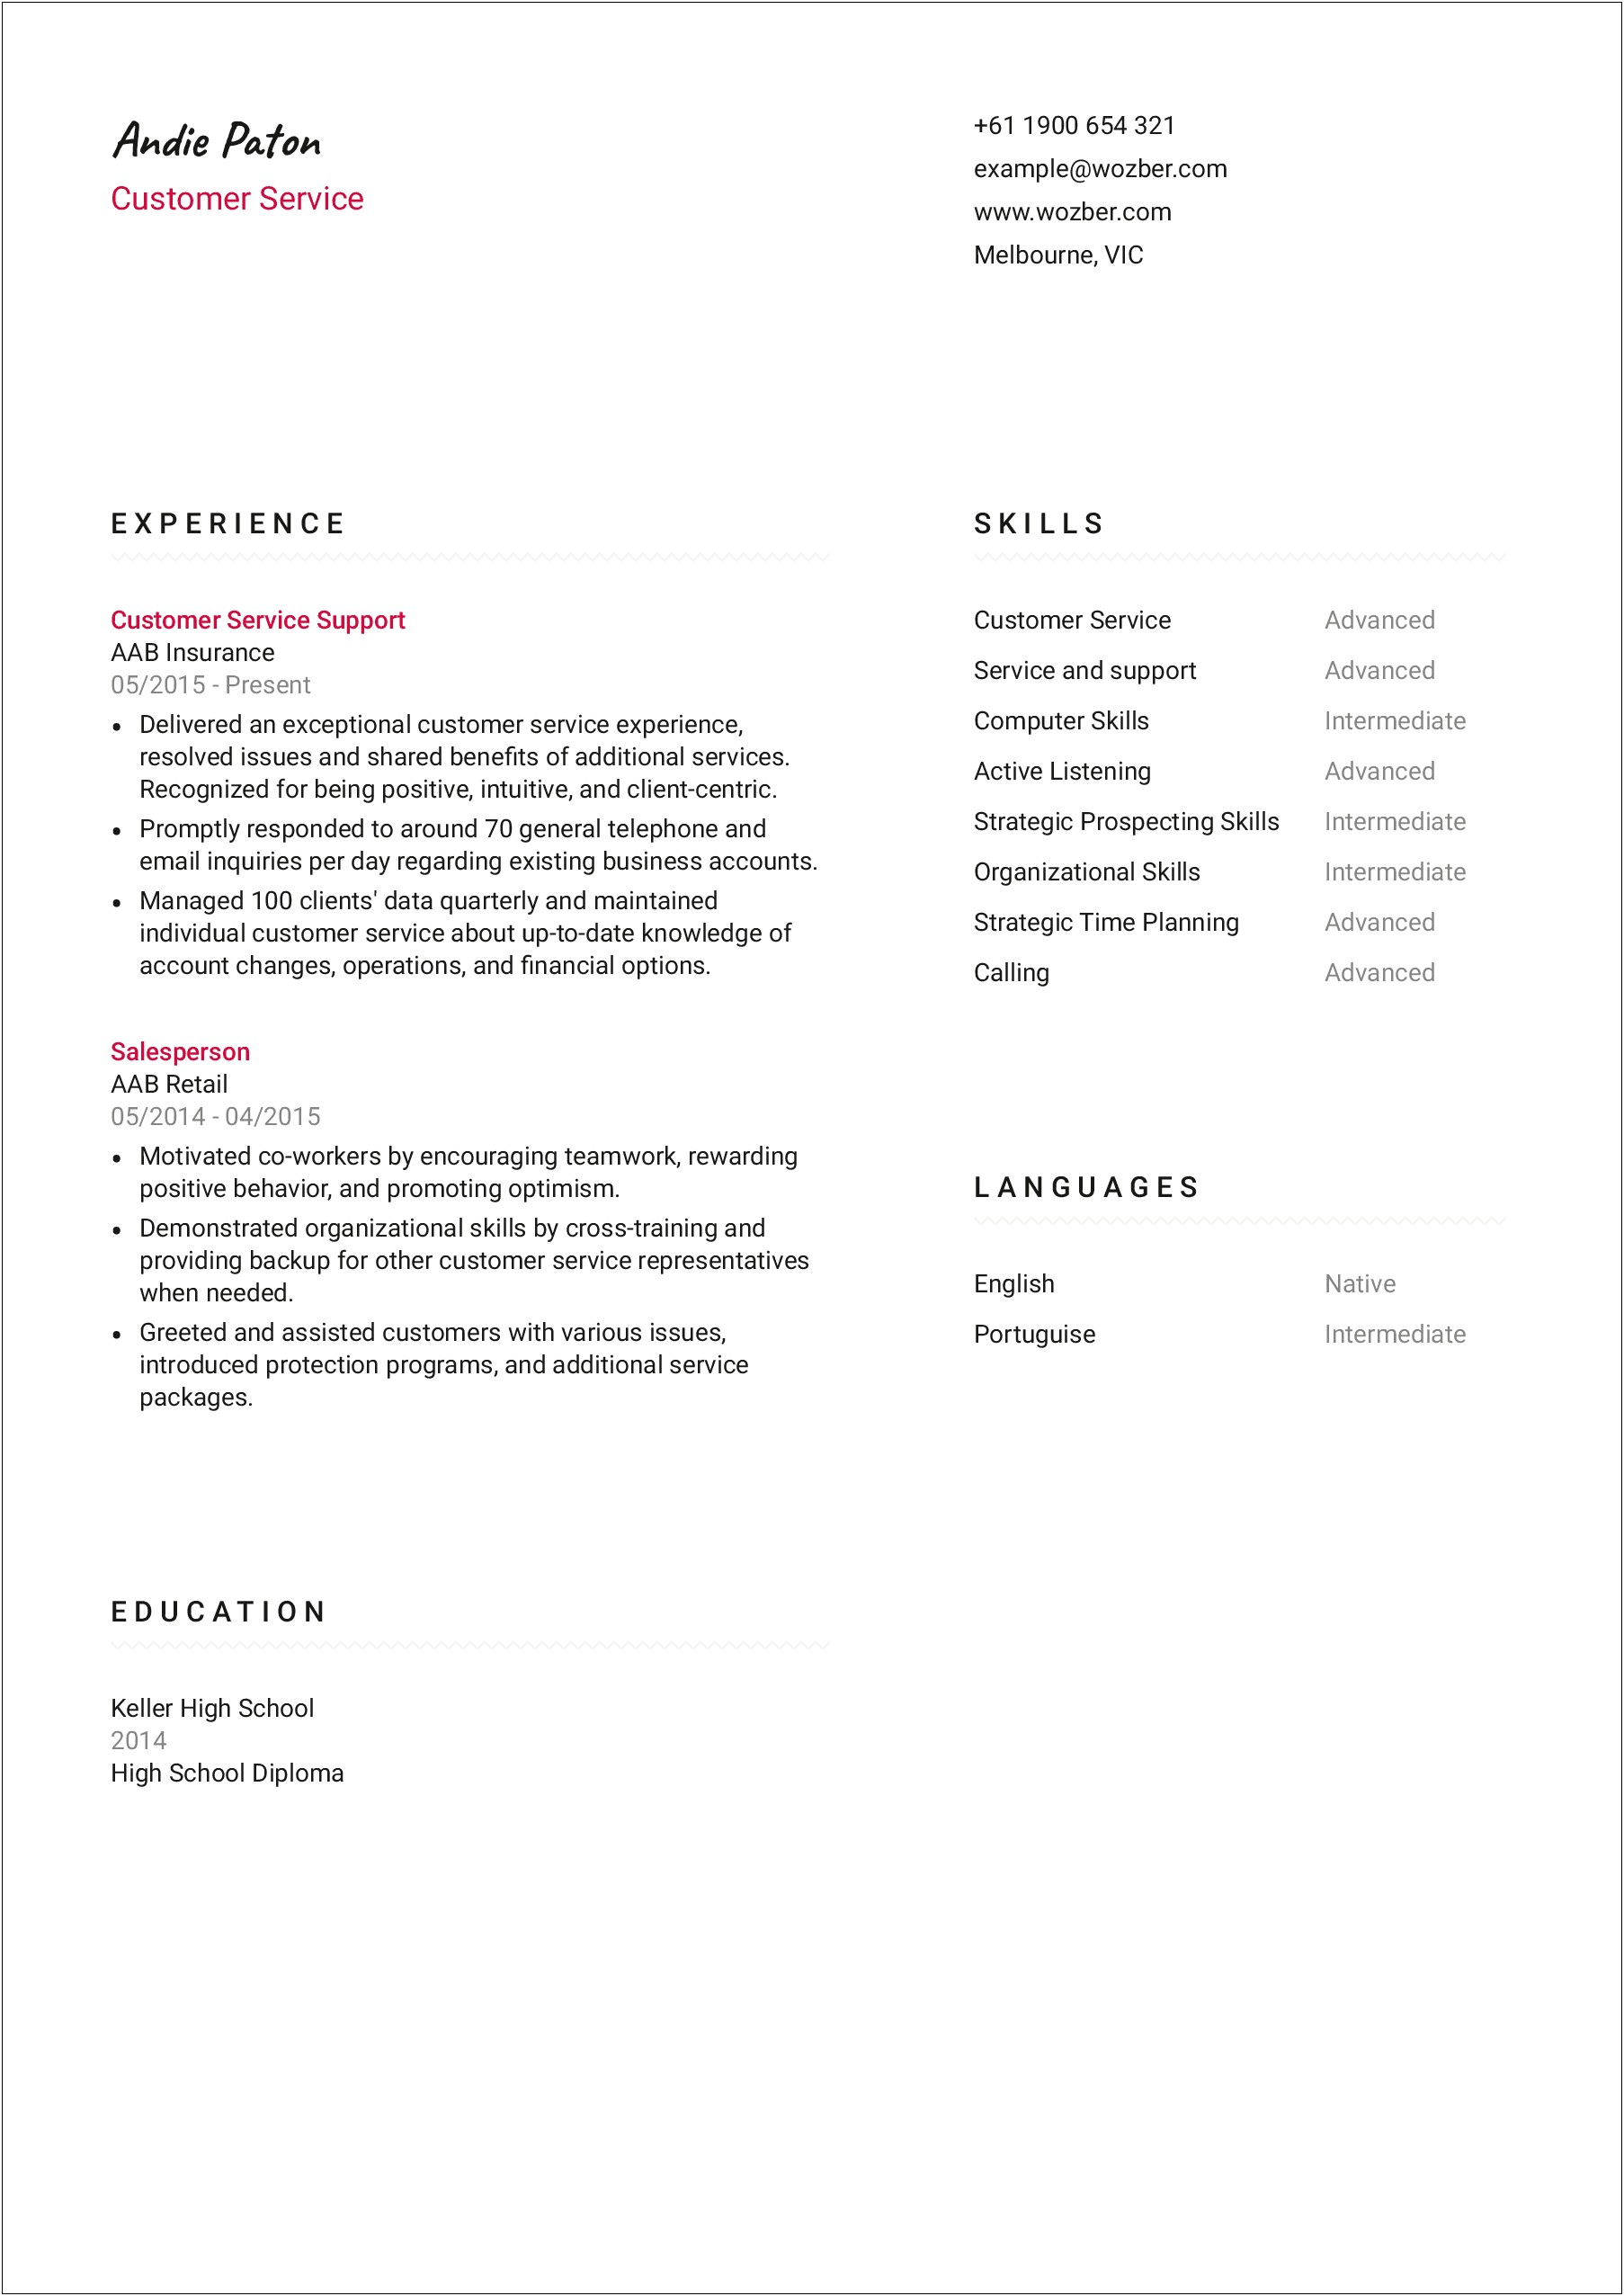 Skills And Qualifications For Customer Service Resume